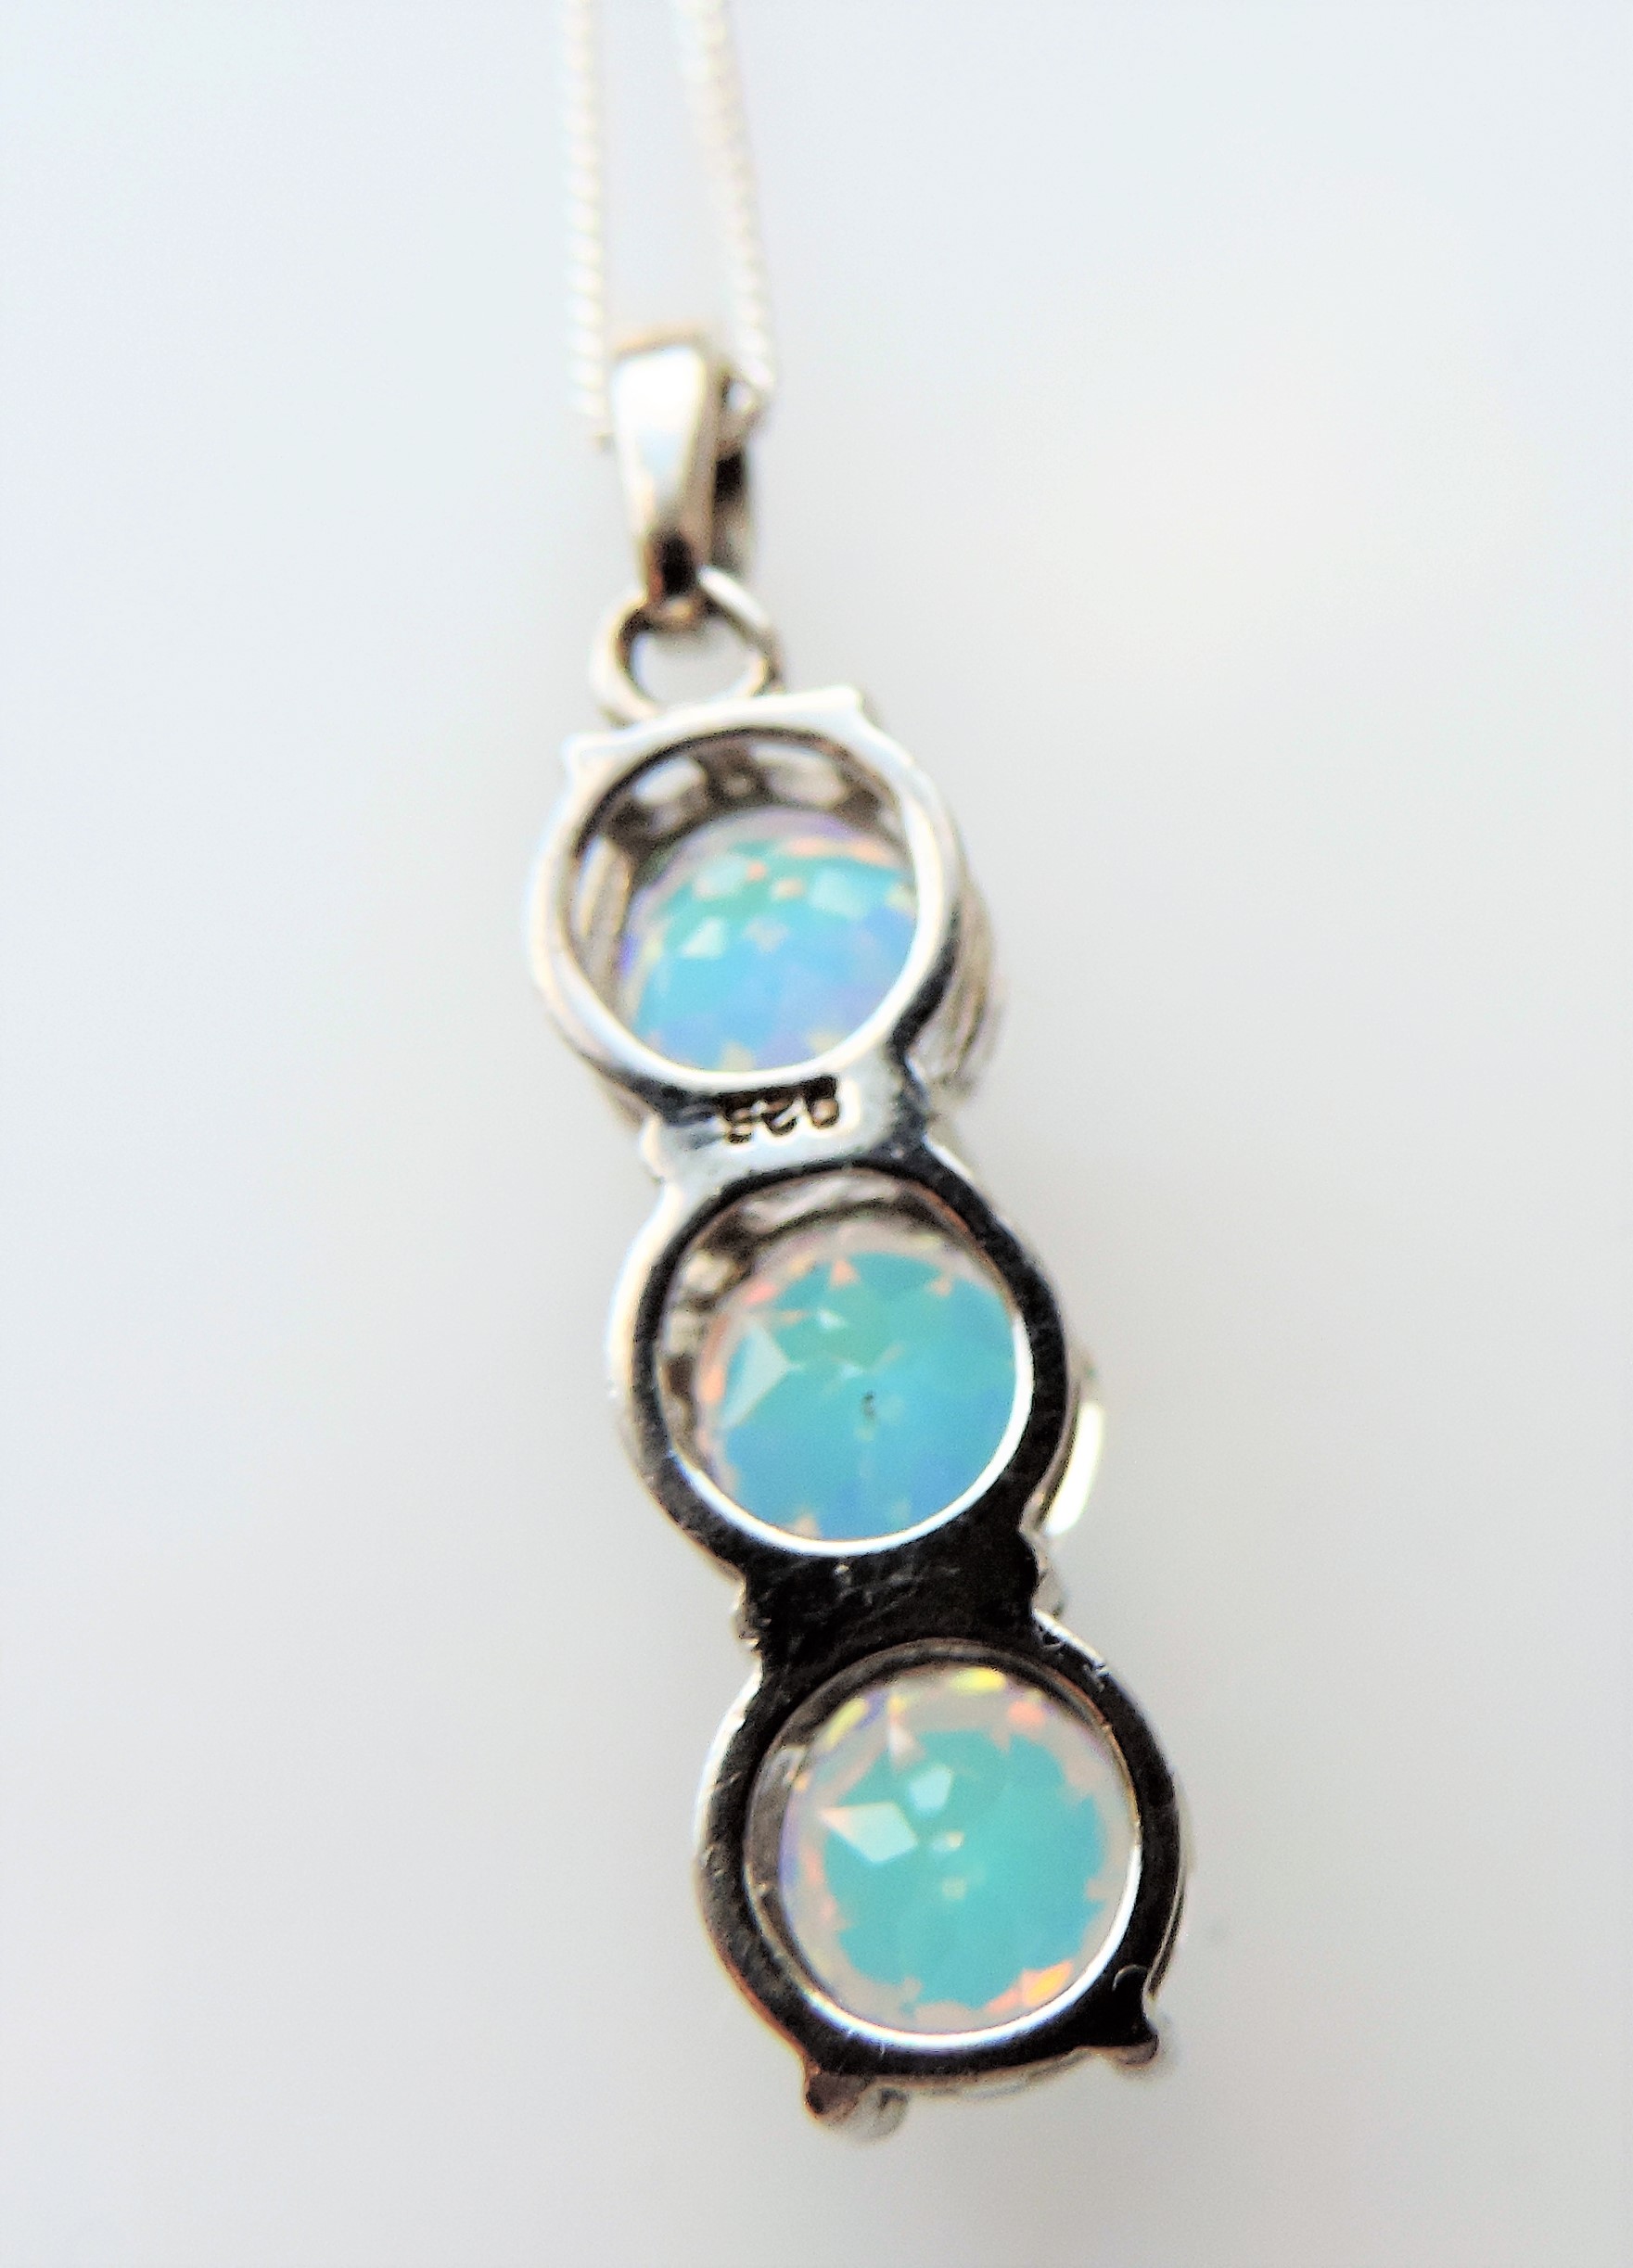 7.5 ct Fire Rainbow Mystic Topaz Sterling Silver Necklace - Image 4 of 5